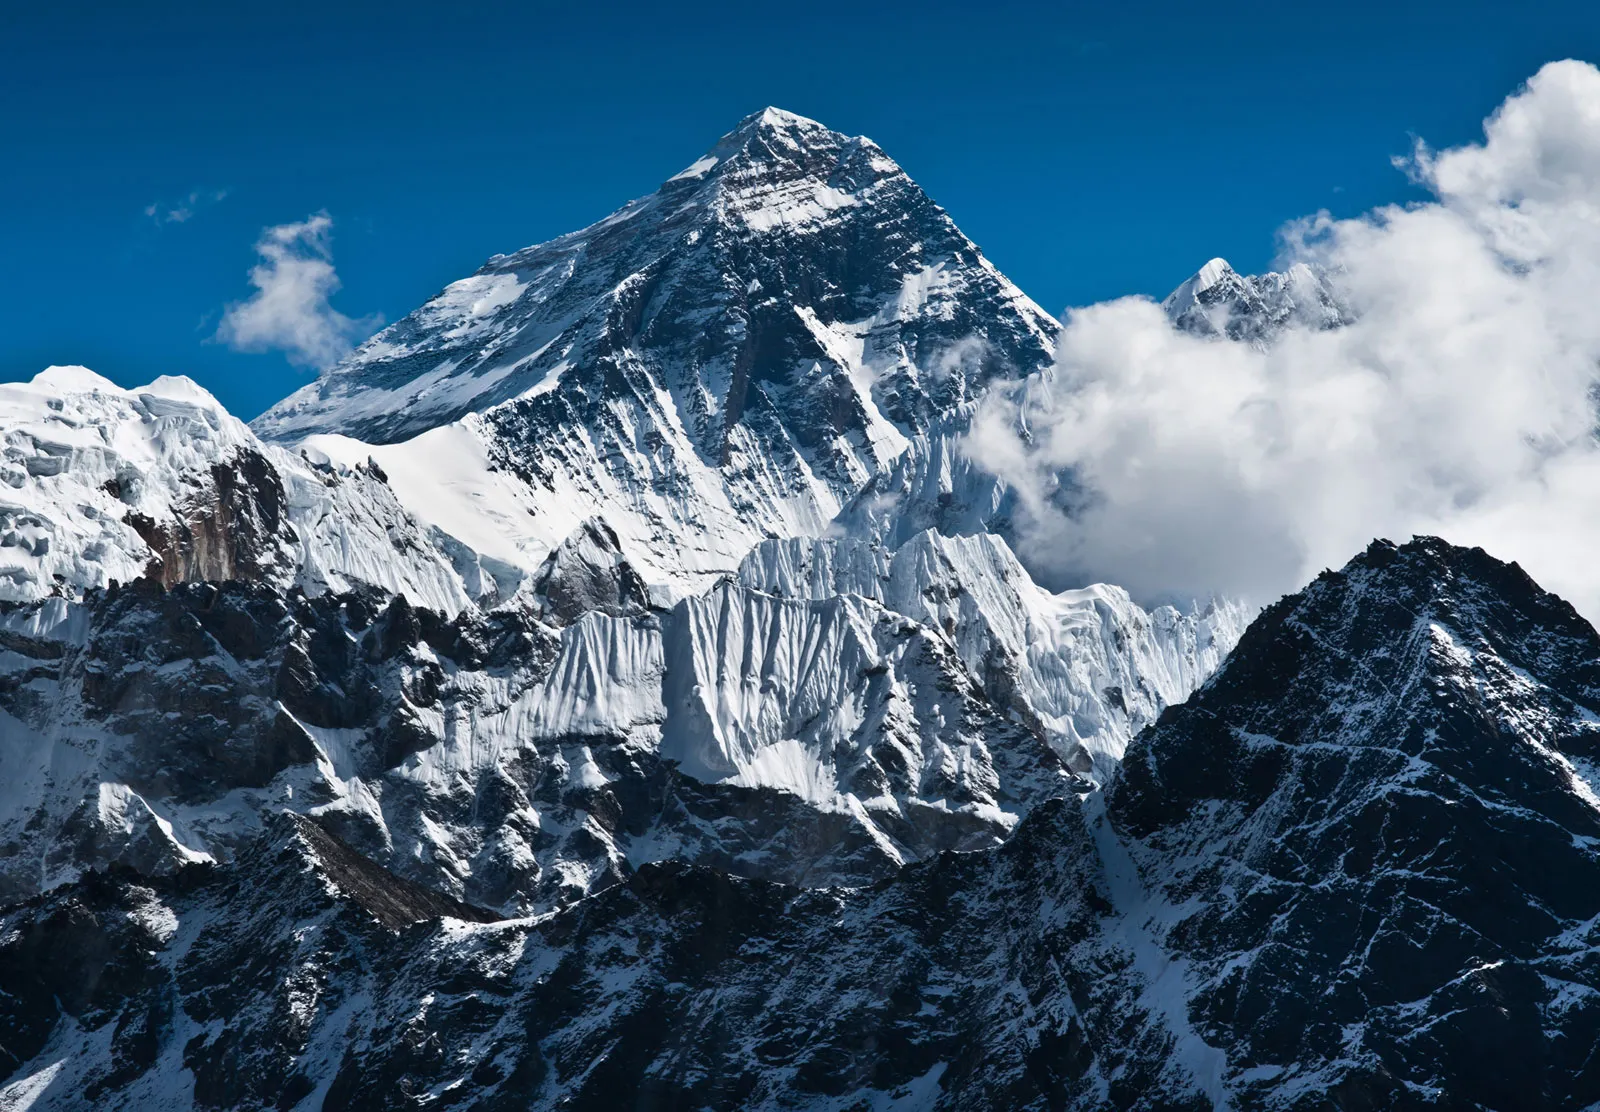 Amazing Facts About Mount Everest-It can cost between £25,000 to £70,000 to climb Mount Everest.